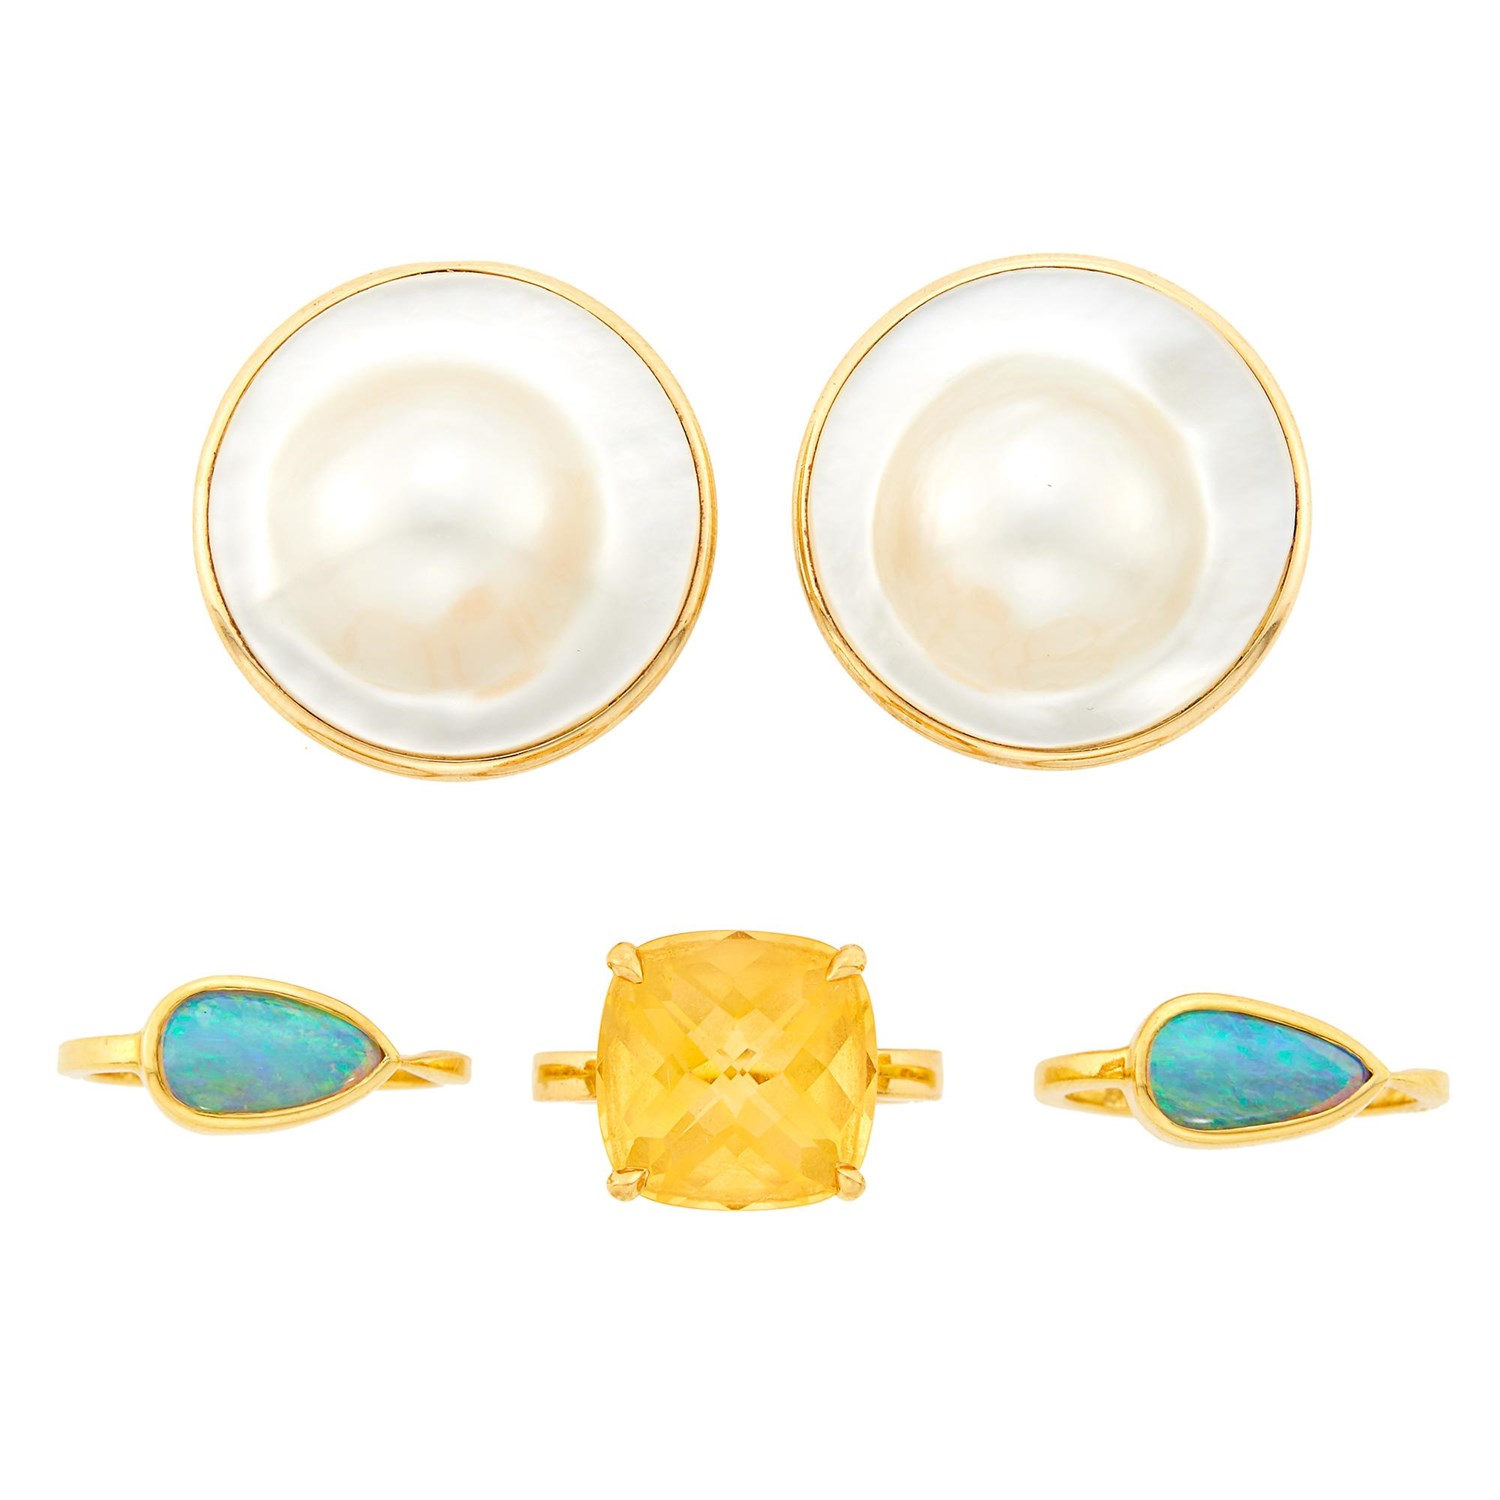 Lot 1079 - Pair of Gold and Opal Rings, Tiffany & Co. Gold and Citrine Ring and Pair of Gold and Mabé Pearl Earclips